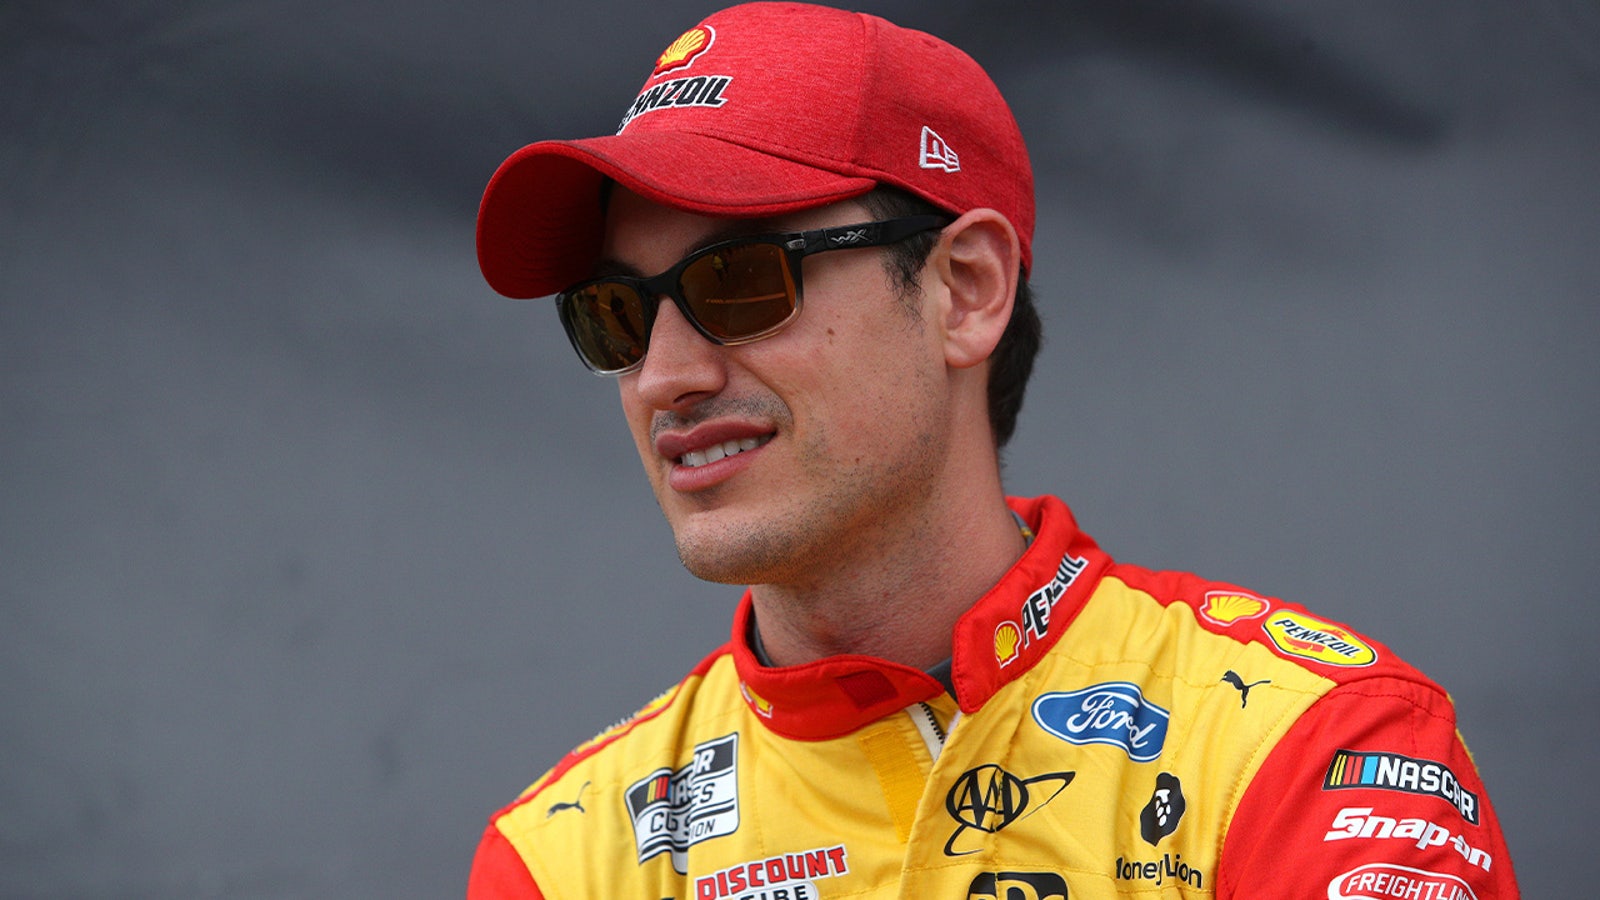 'It's changing the game!' — Joey Logano describes the potential impact of the Clash at the Coliseum